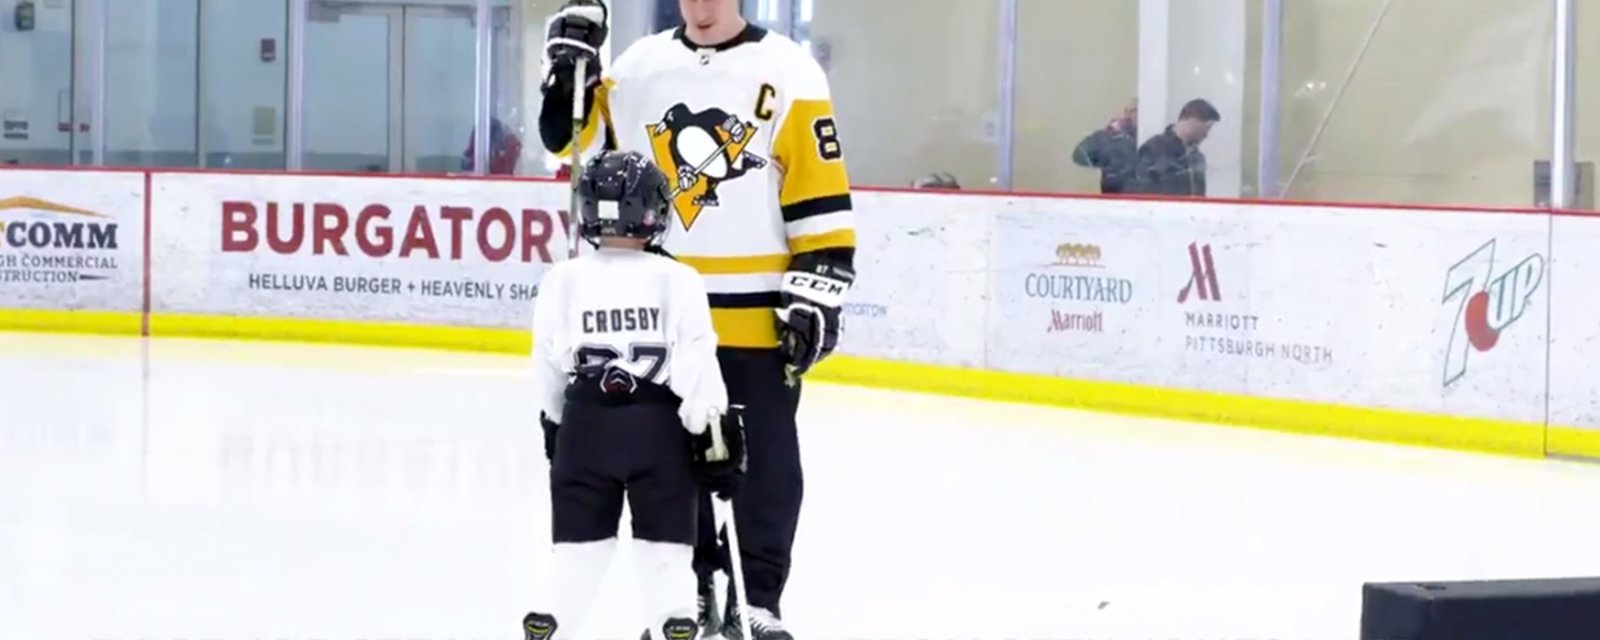 Crosby has an adorable on-ice interaction with young hockey player